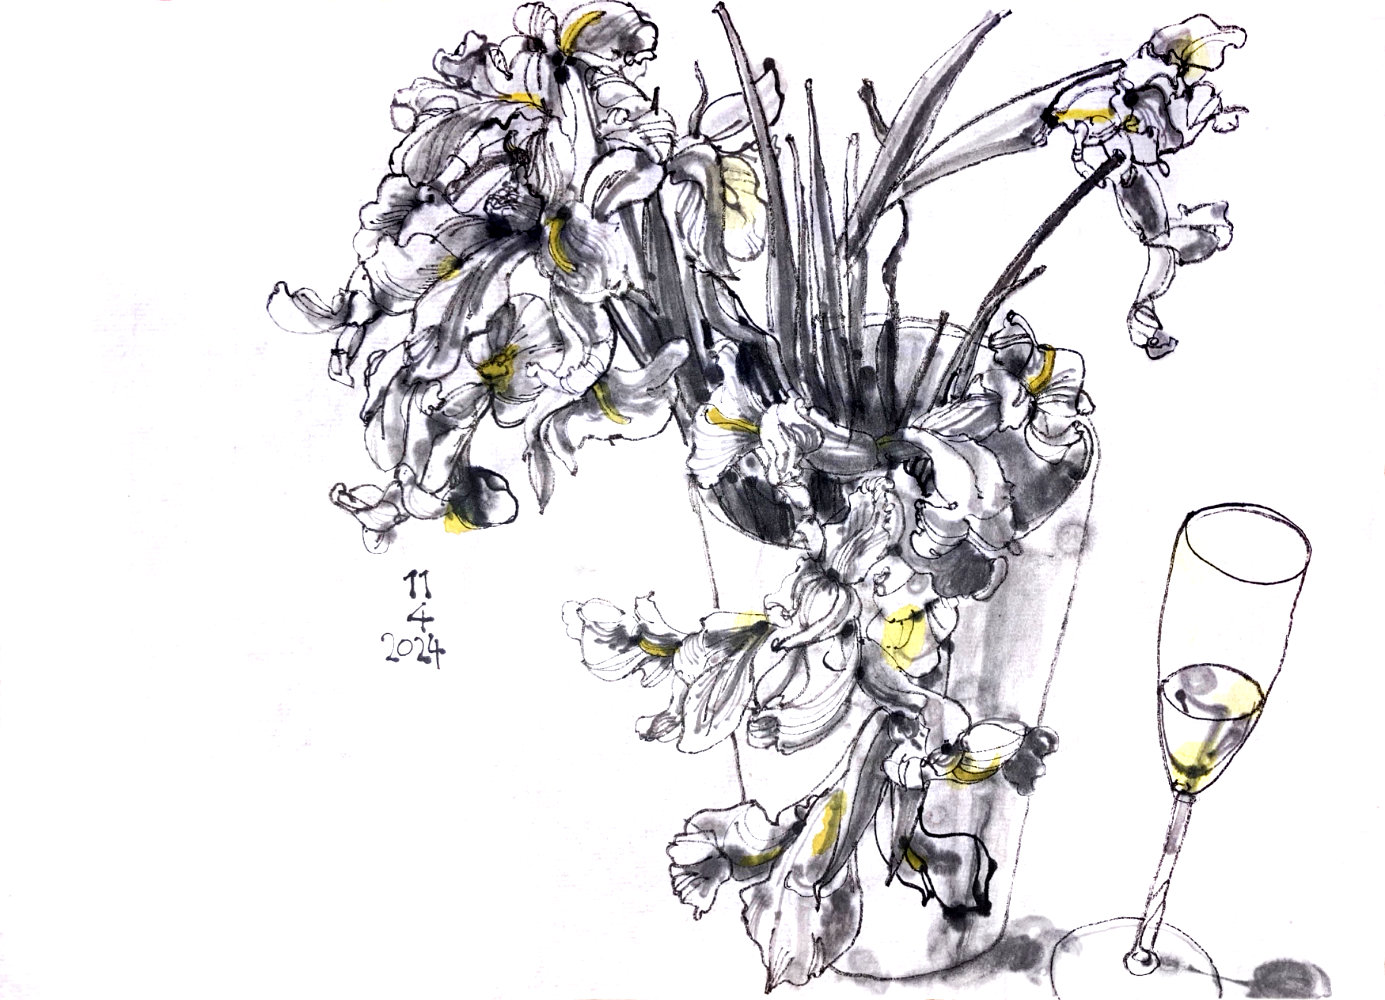 Ink drawing of a bouqet of irises, already blooming widely, in a vase, aside of a half filled wine glass.